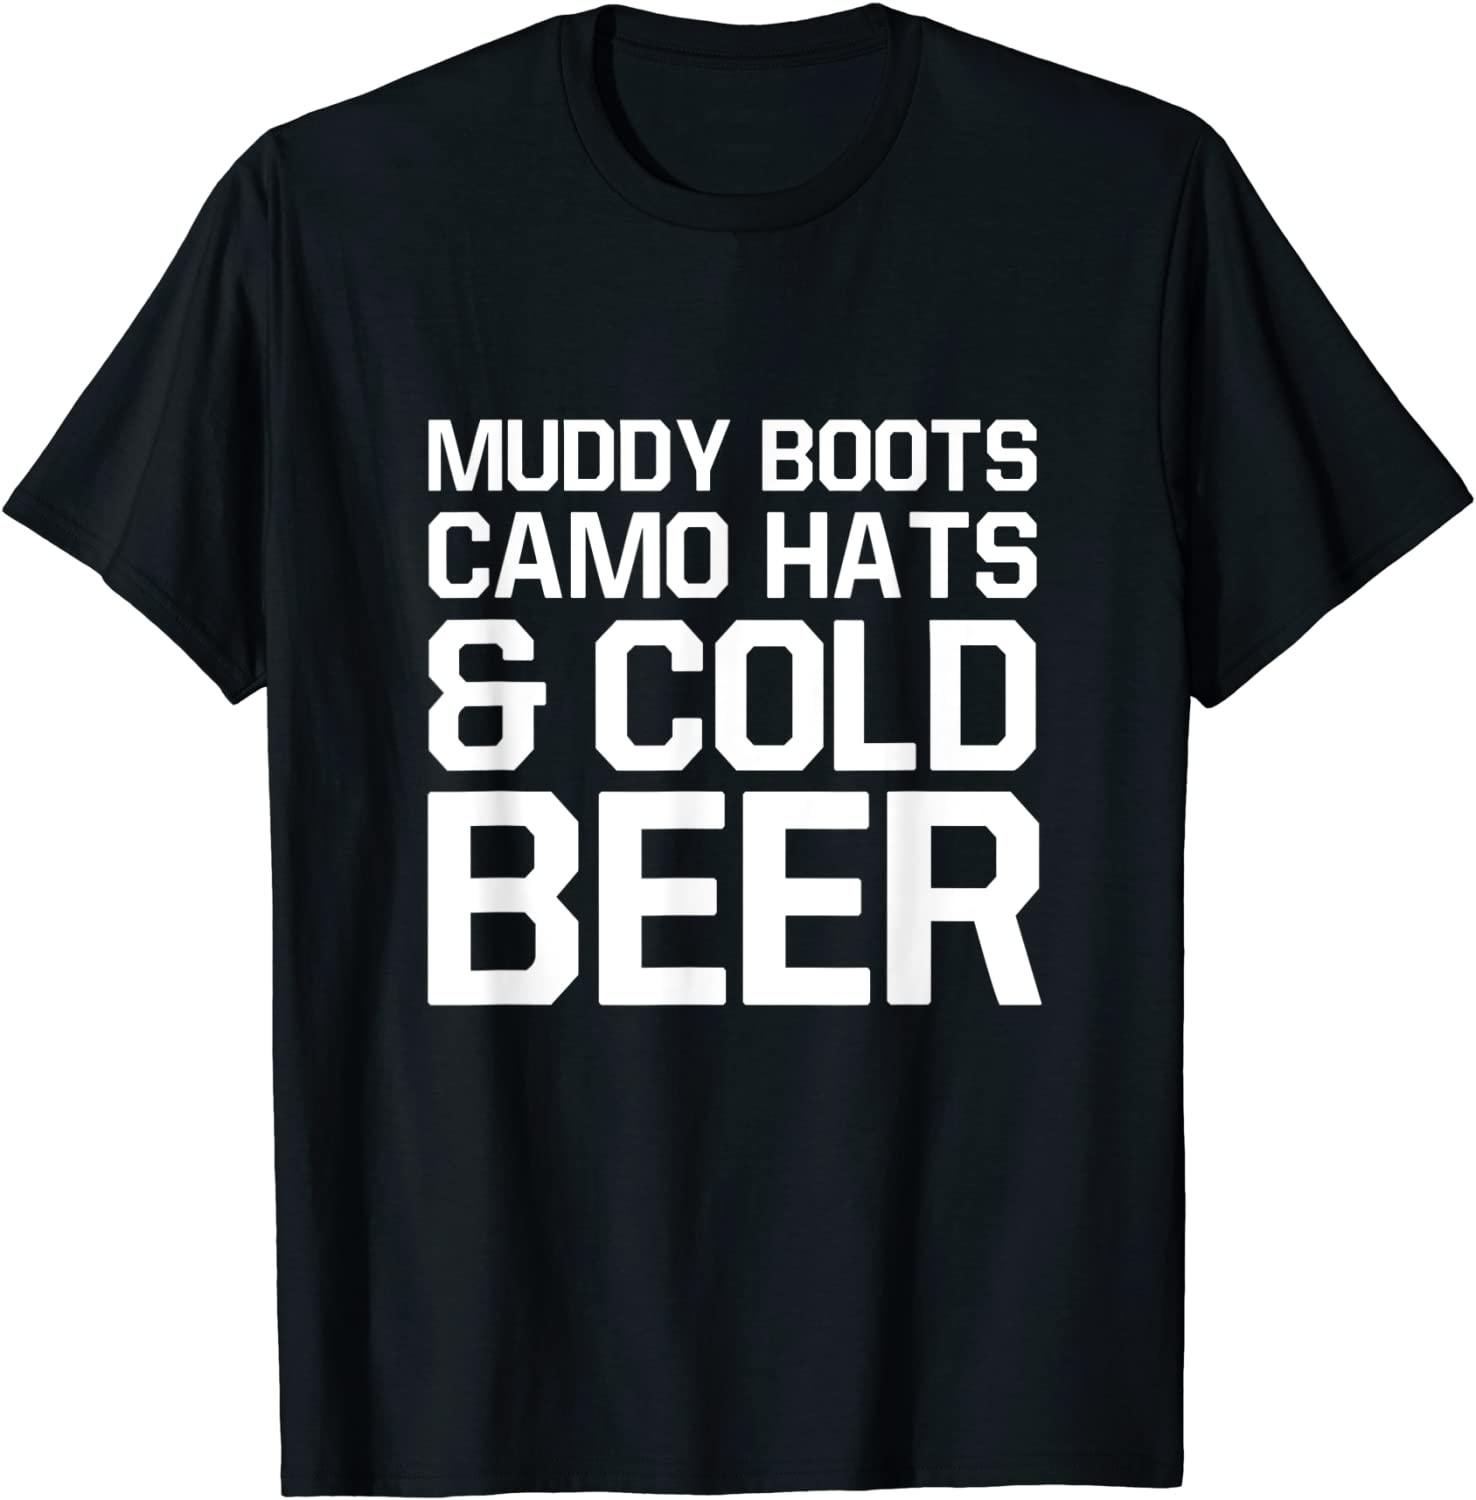 Muddy Boots Camo Hats And Cold Beer T-Shirt